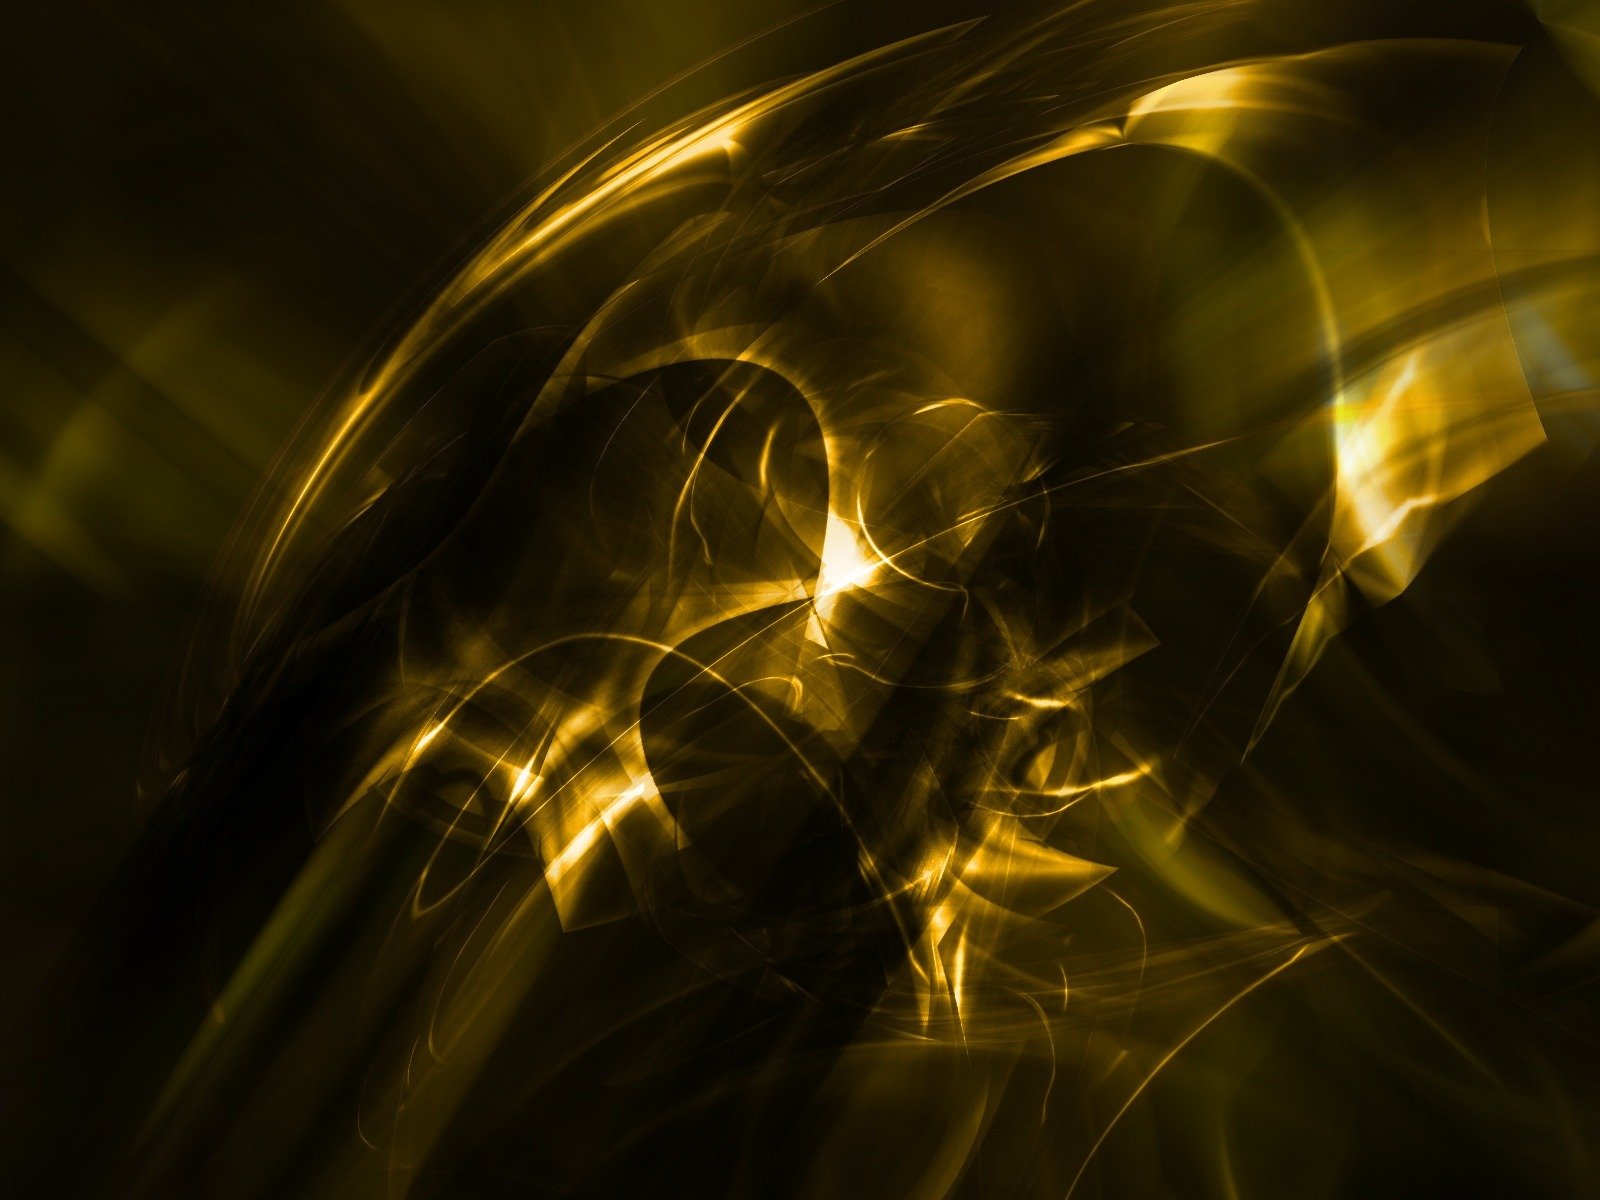 Black And Gold Abstract Wallpaper 12 Widescreen Wallpaper 1600x1200